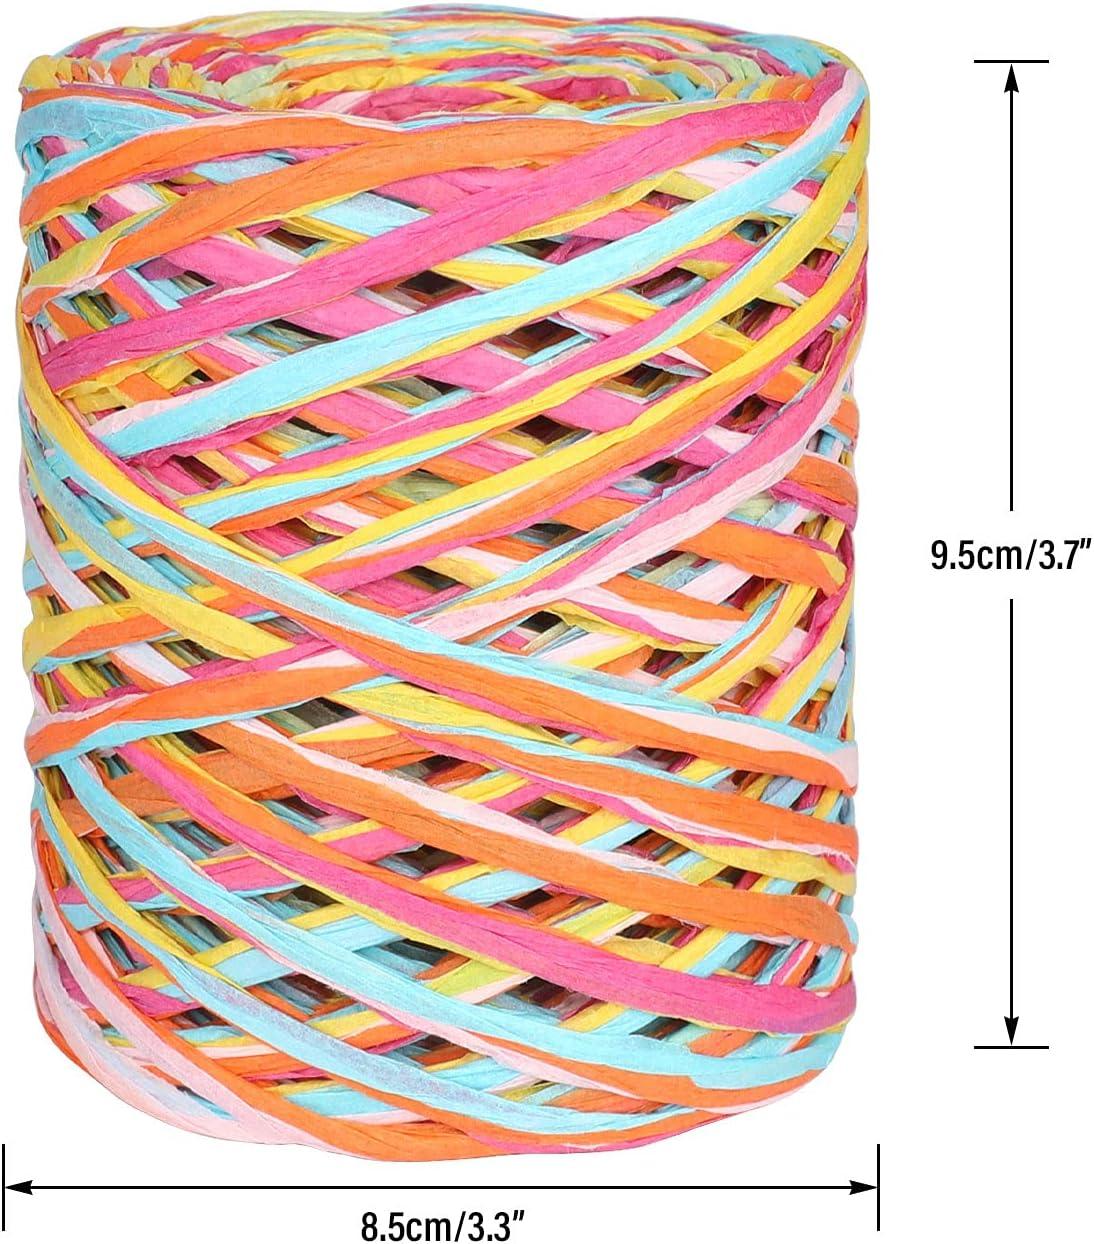 Colored Paper Raffia Ribbon, Twine Cord String for Gift Wrapping